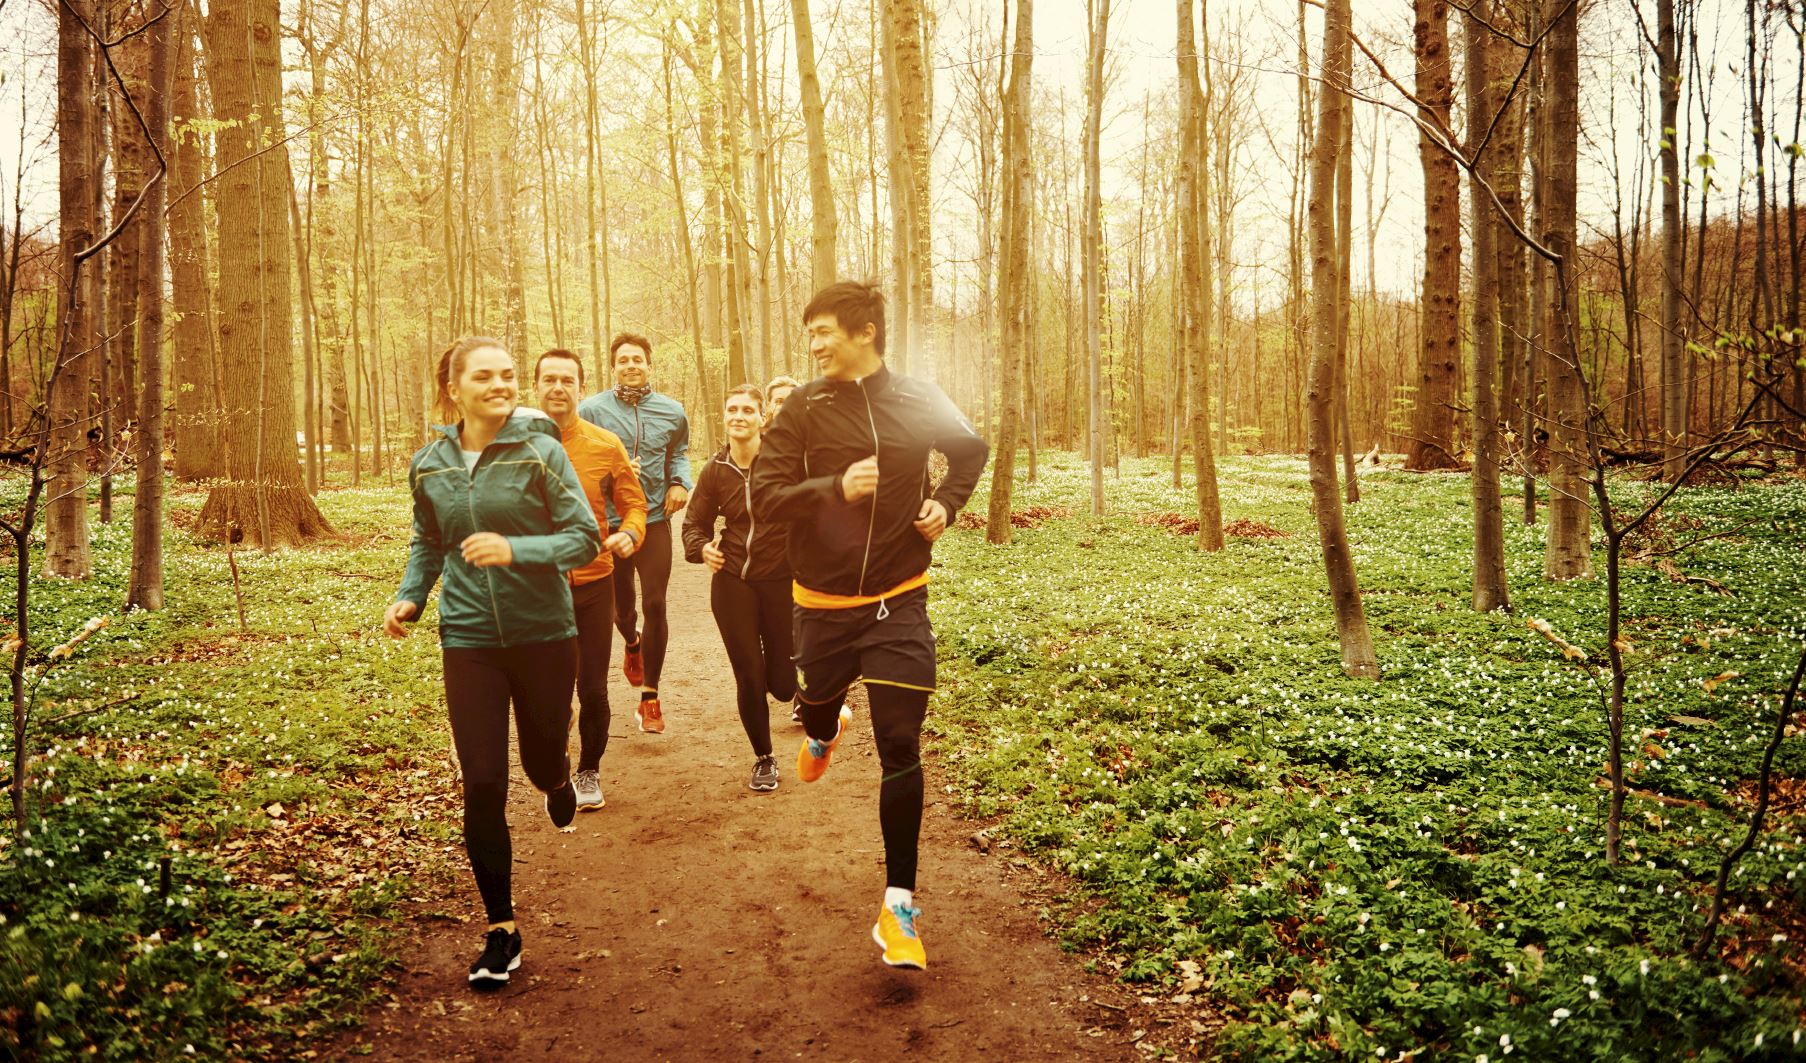 III. Physical Benefits of Trail Running for Mental Health